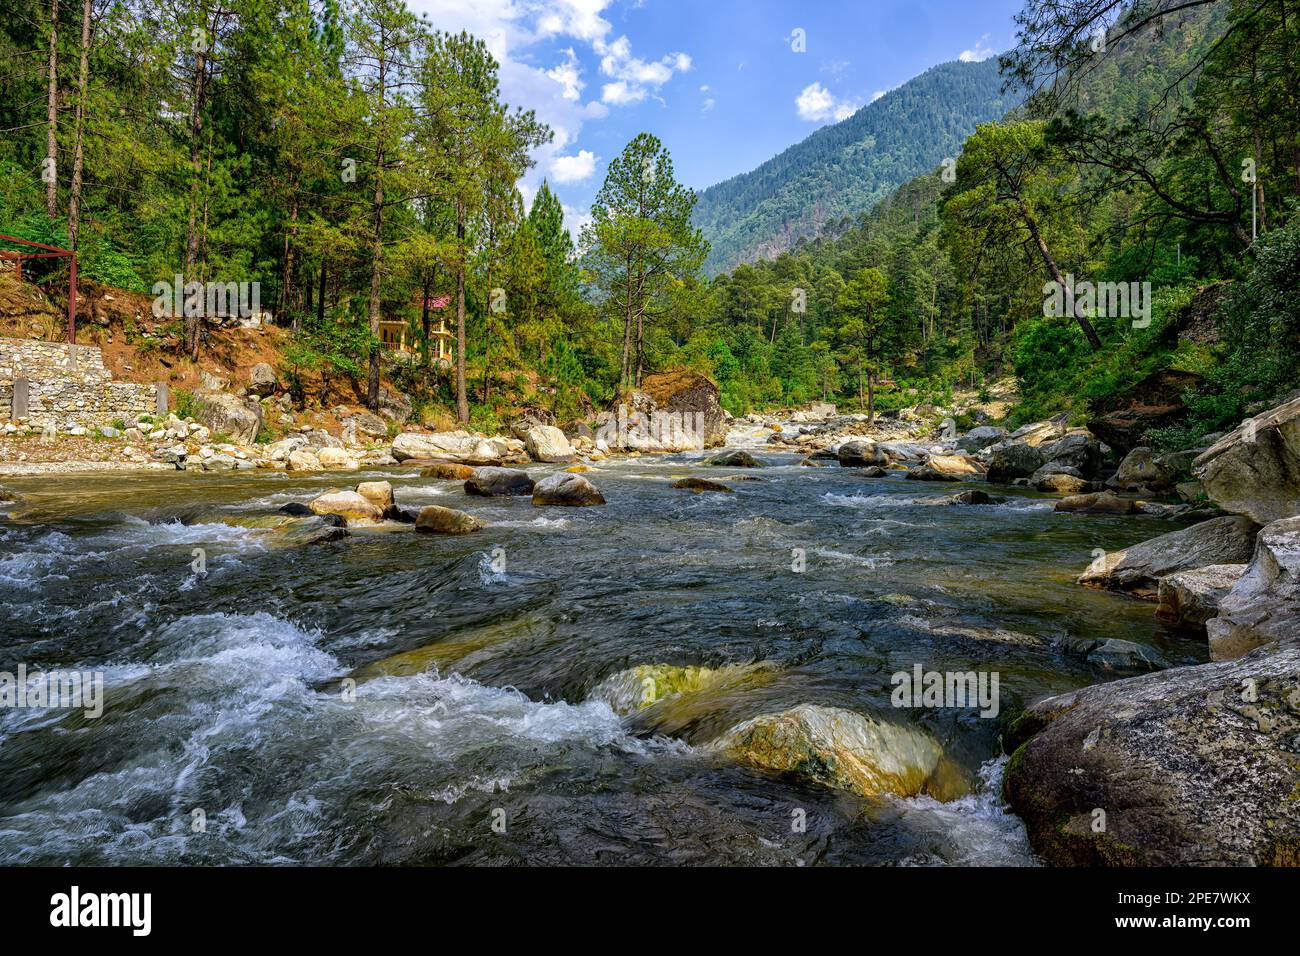 The Tirthan River flows through the scenic Tirthan Valley, which is full of secluded hamlets, waterfalls, Cedrus deodara and pine forests. Stock Photo